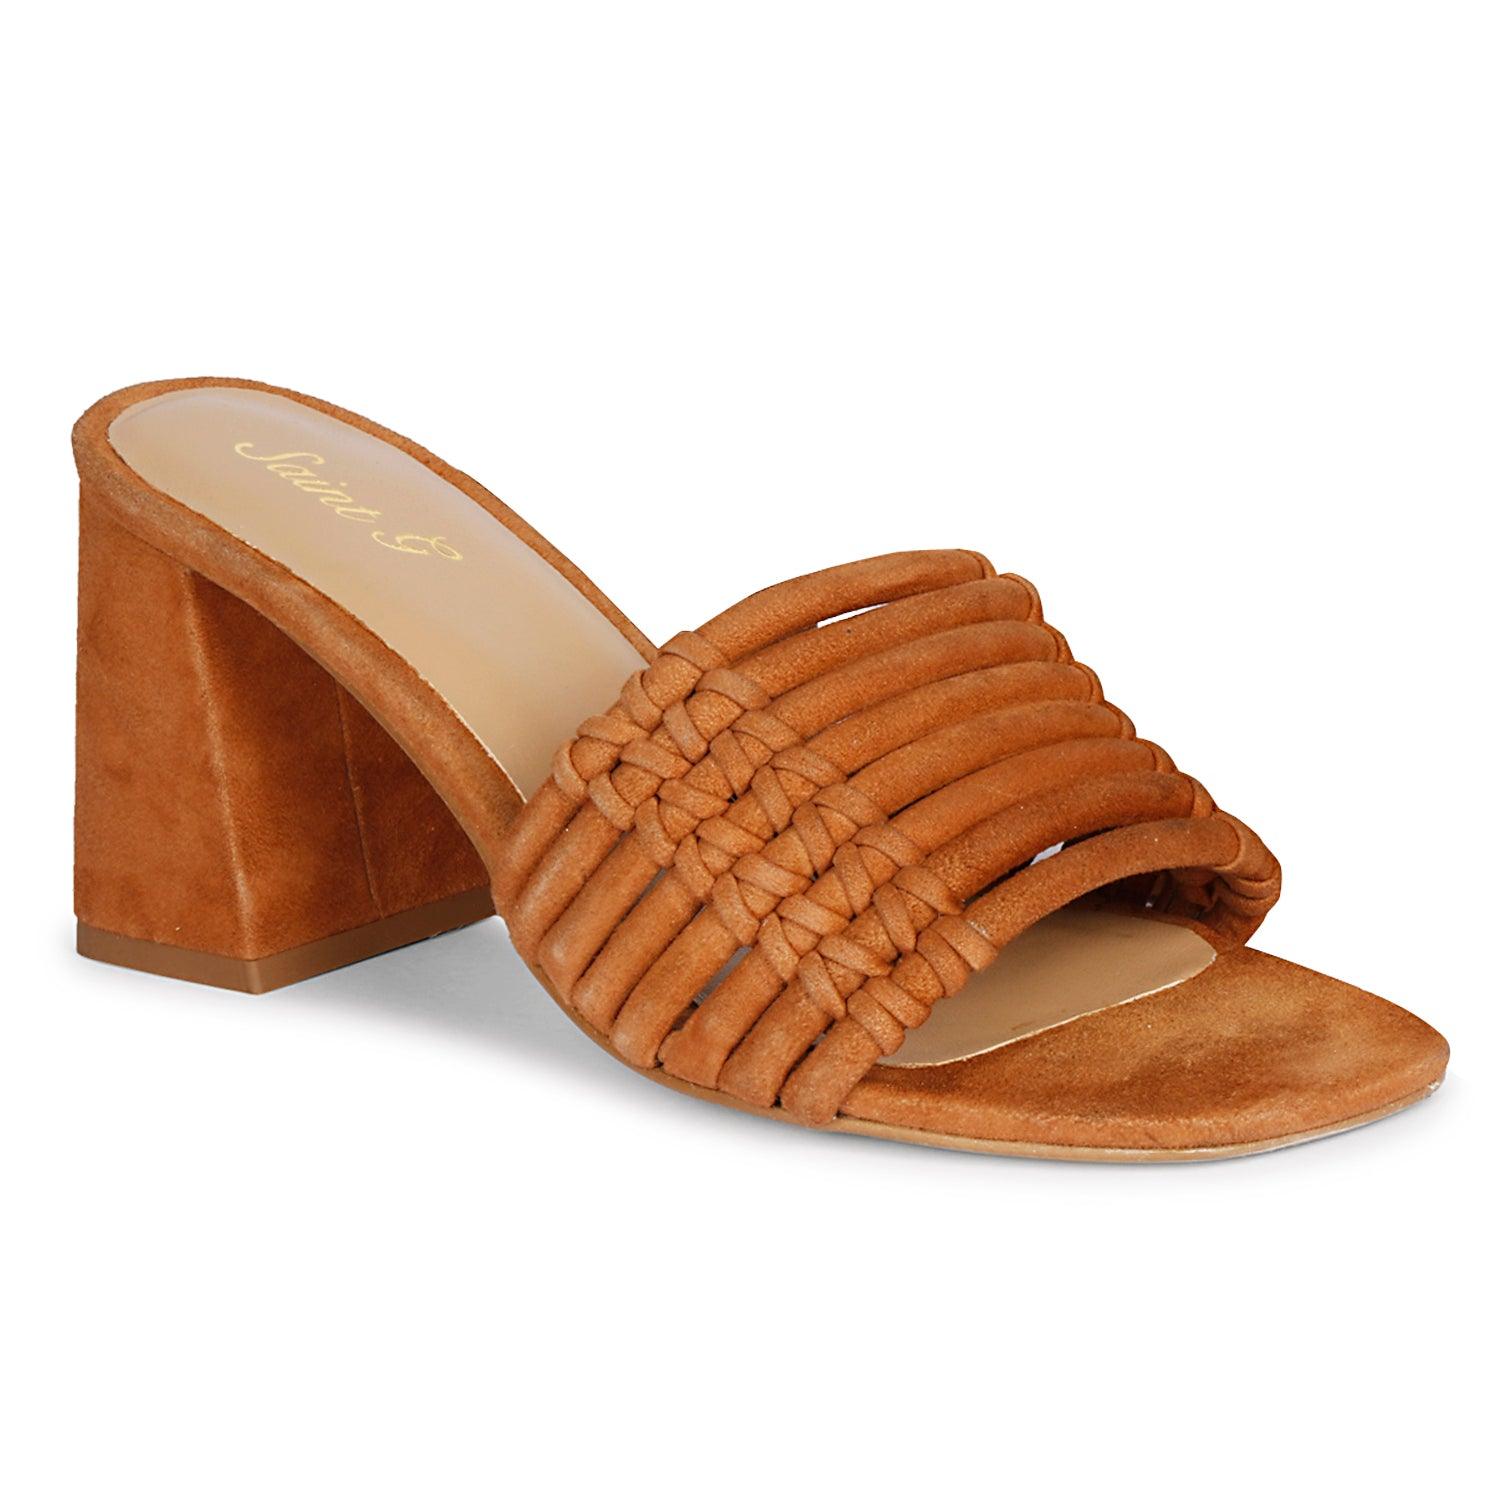 Bethany Cuoio Suede Sandals